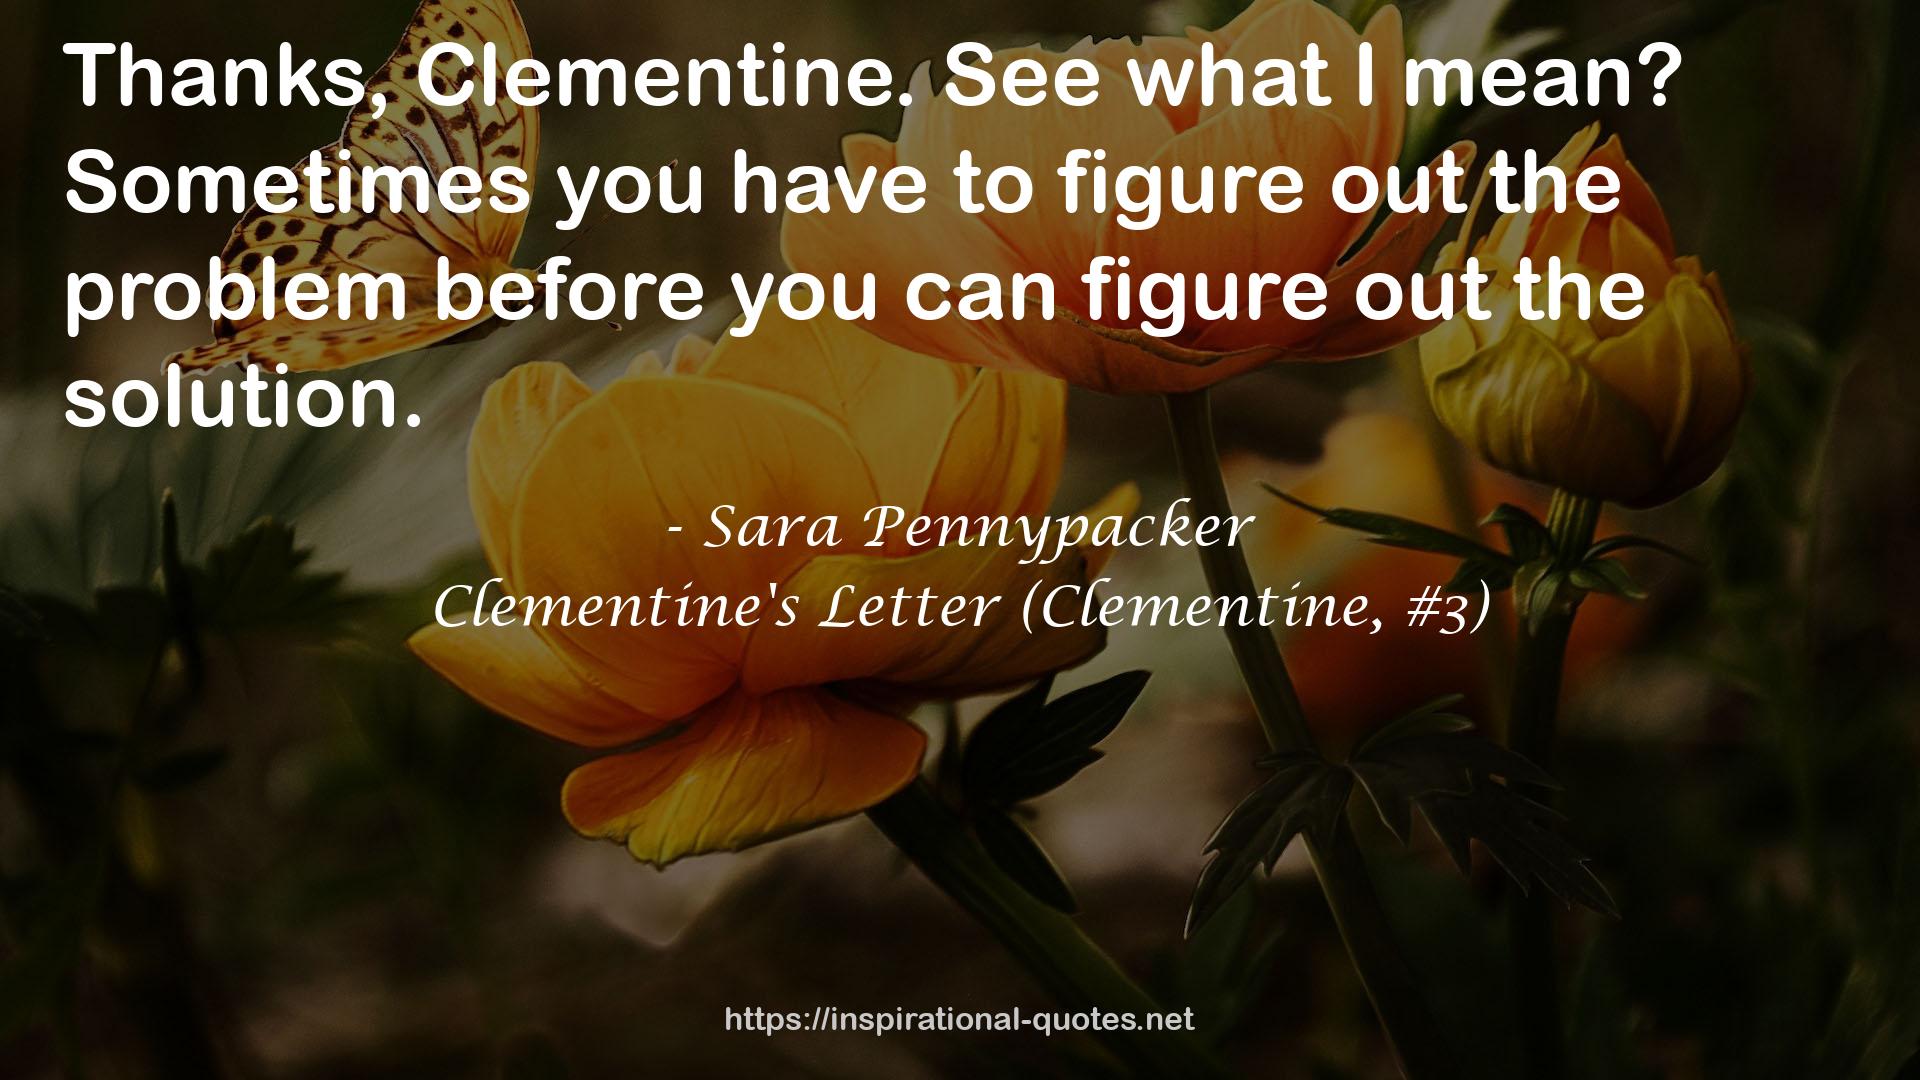 Clementine's Letter (Clementine, #3) QUOTES